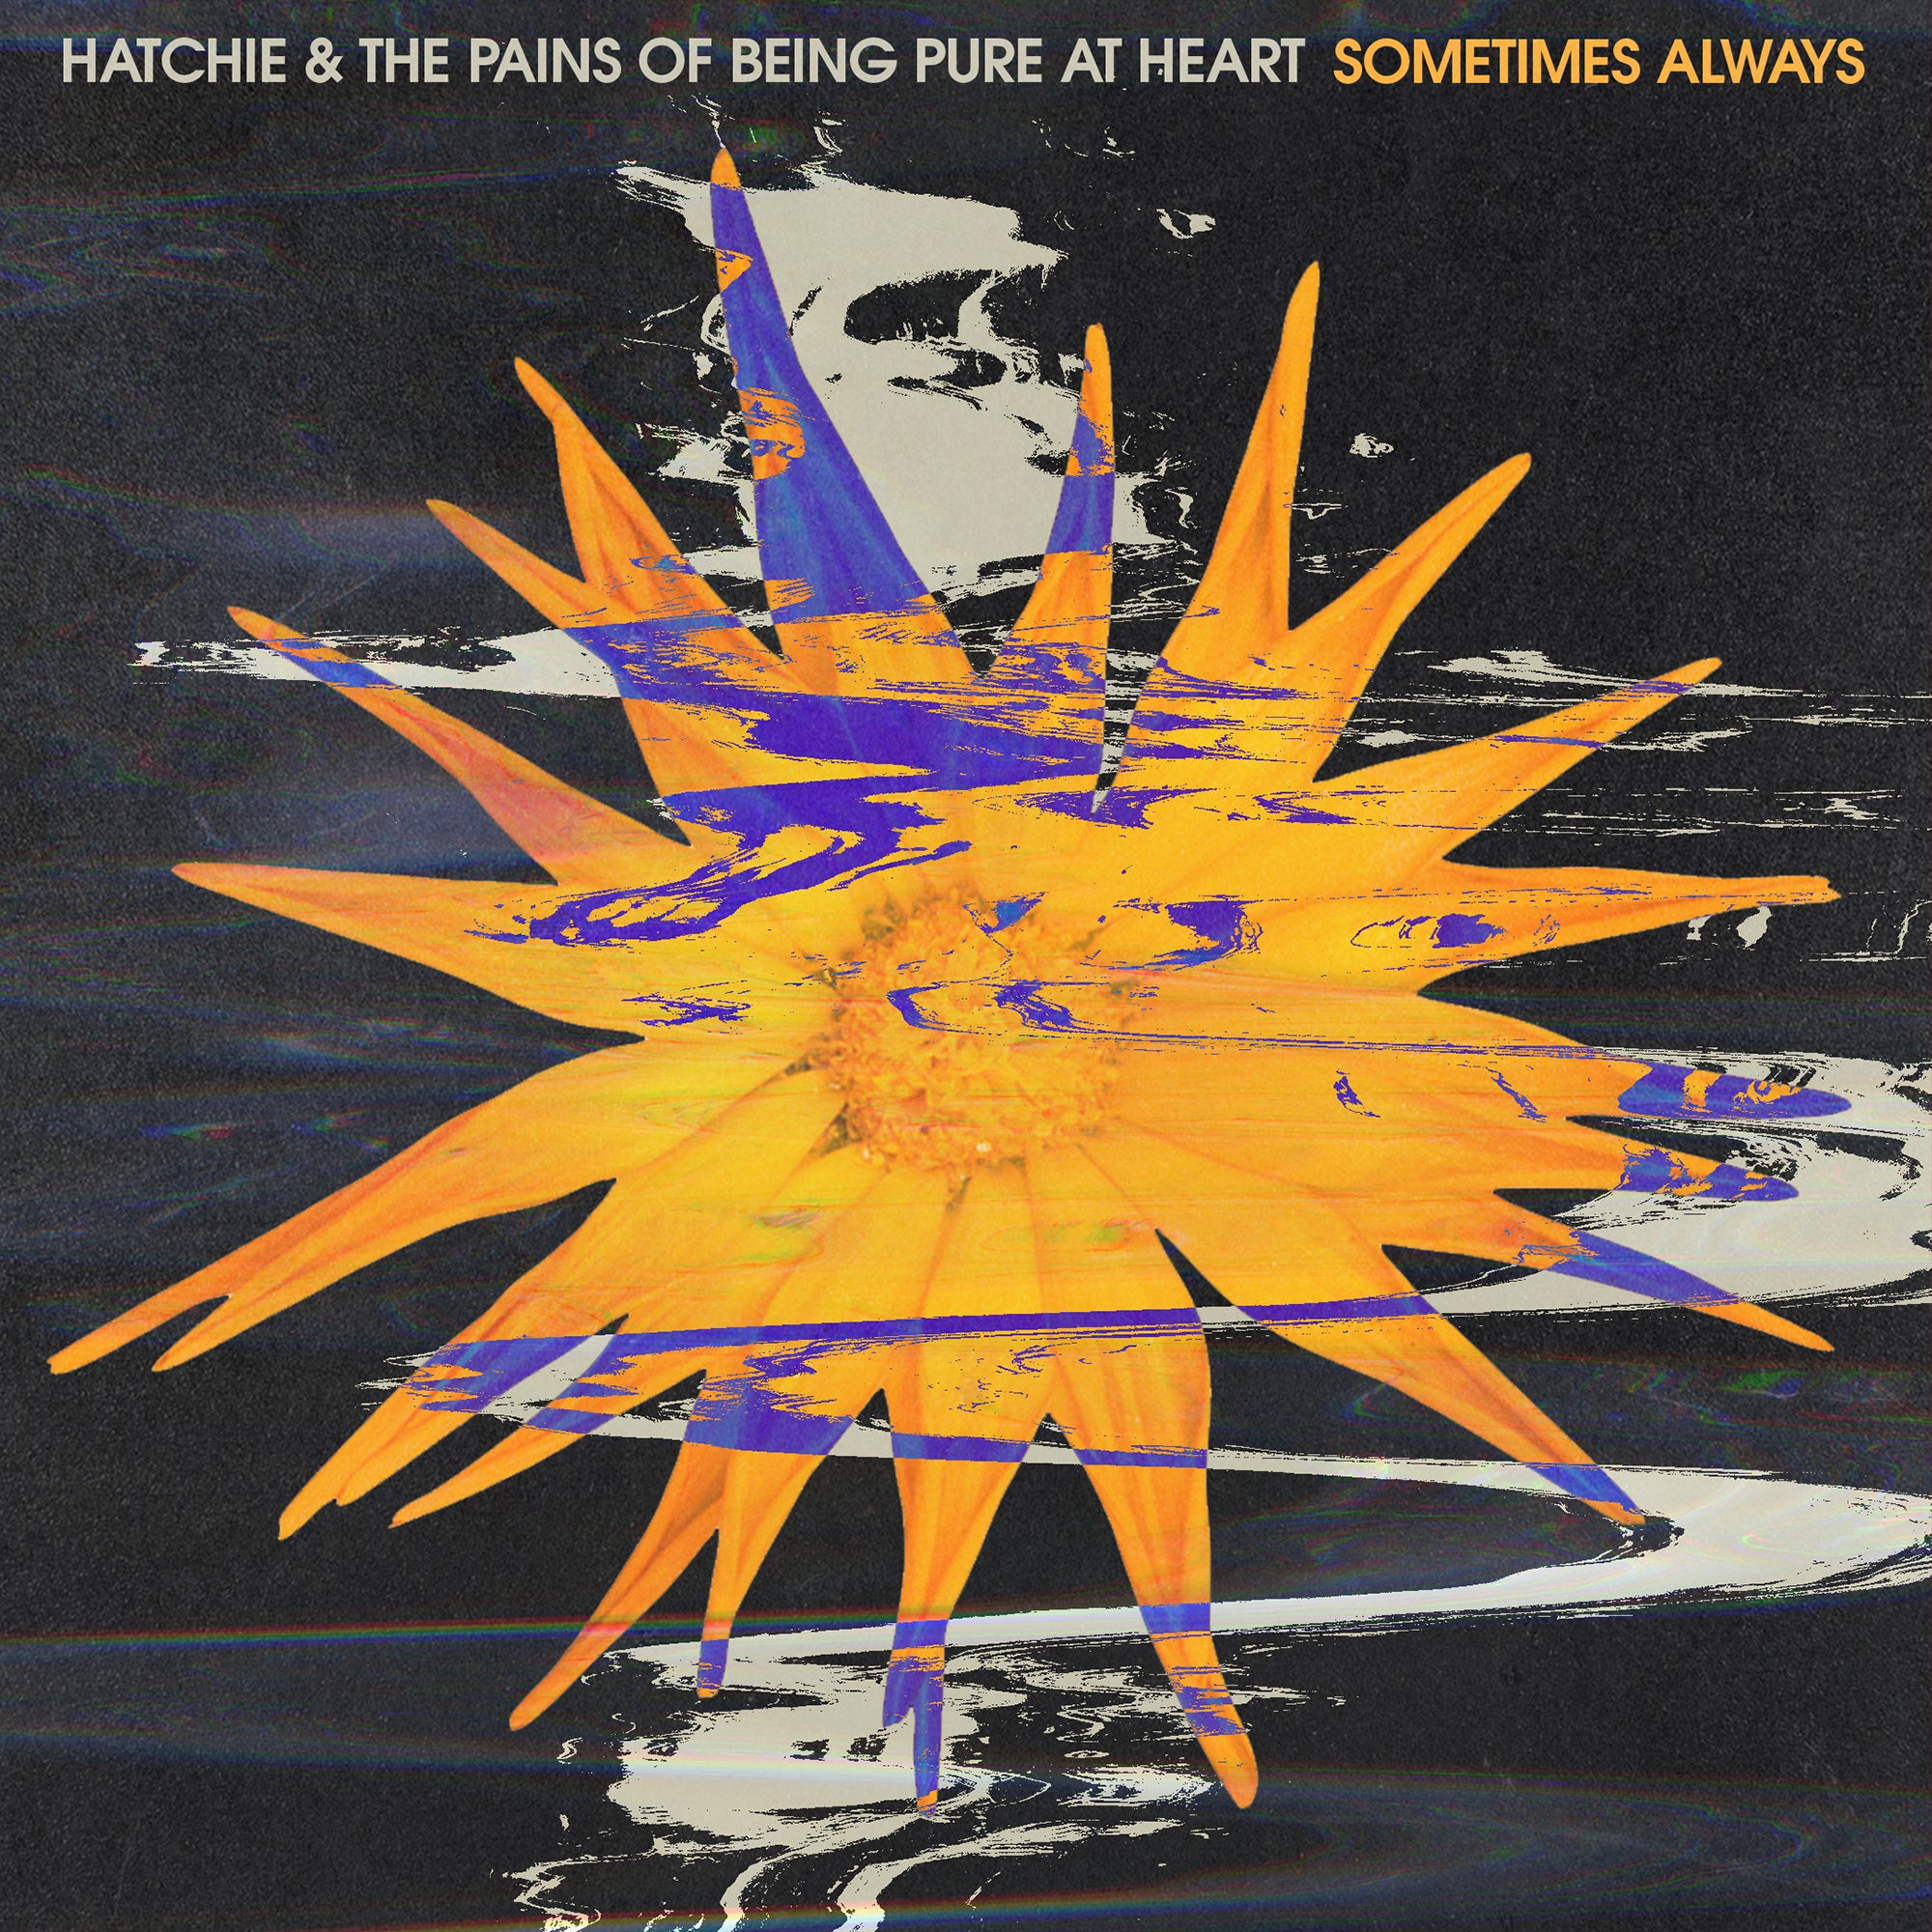 HATCHIE & THE PAINS OF BEING PURE AT HEART - Sometimes Always (LRSD 2020) - 7" Limited Purple Vinyl